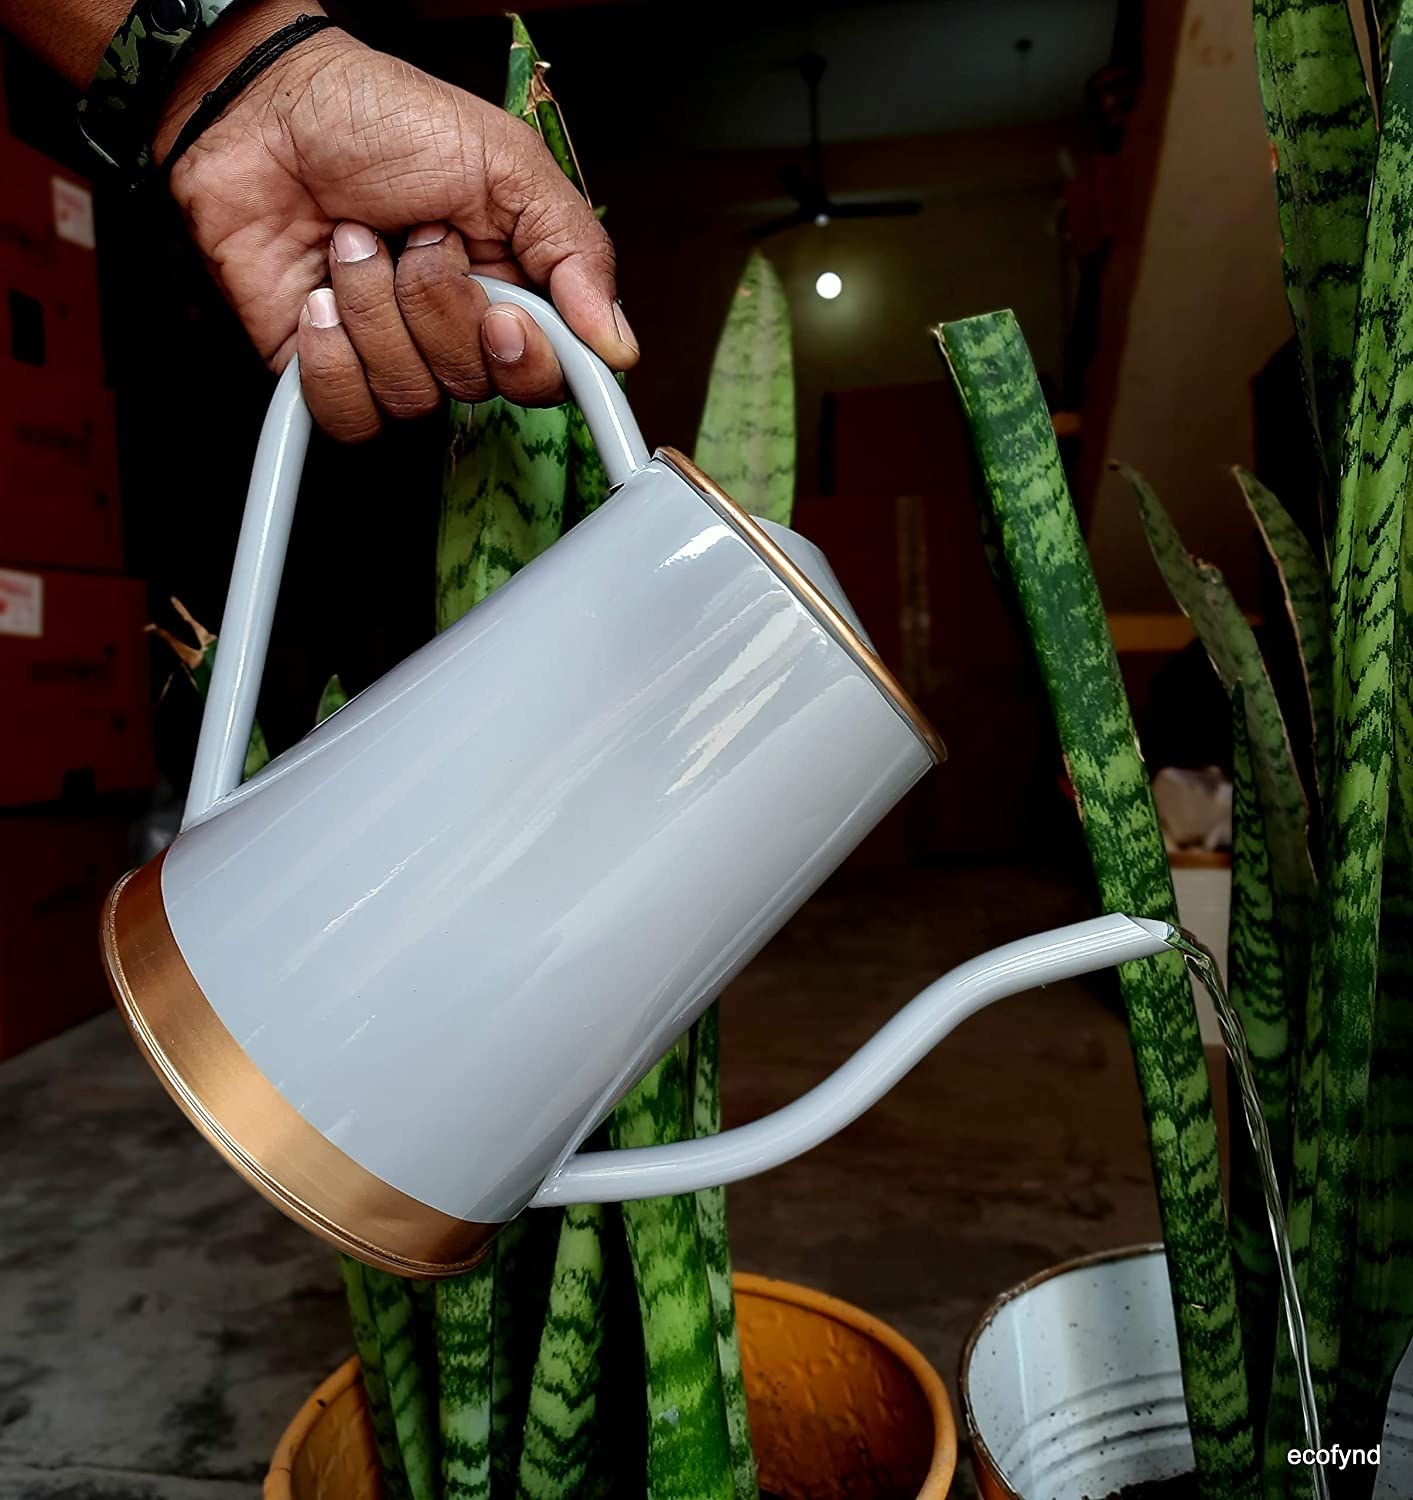 A hand watering plants.